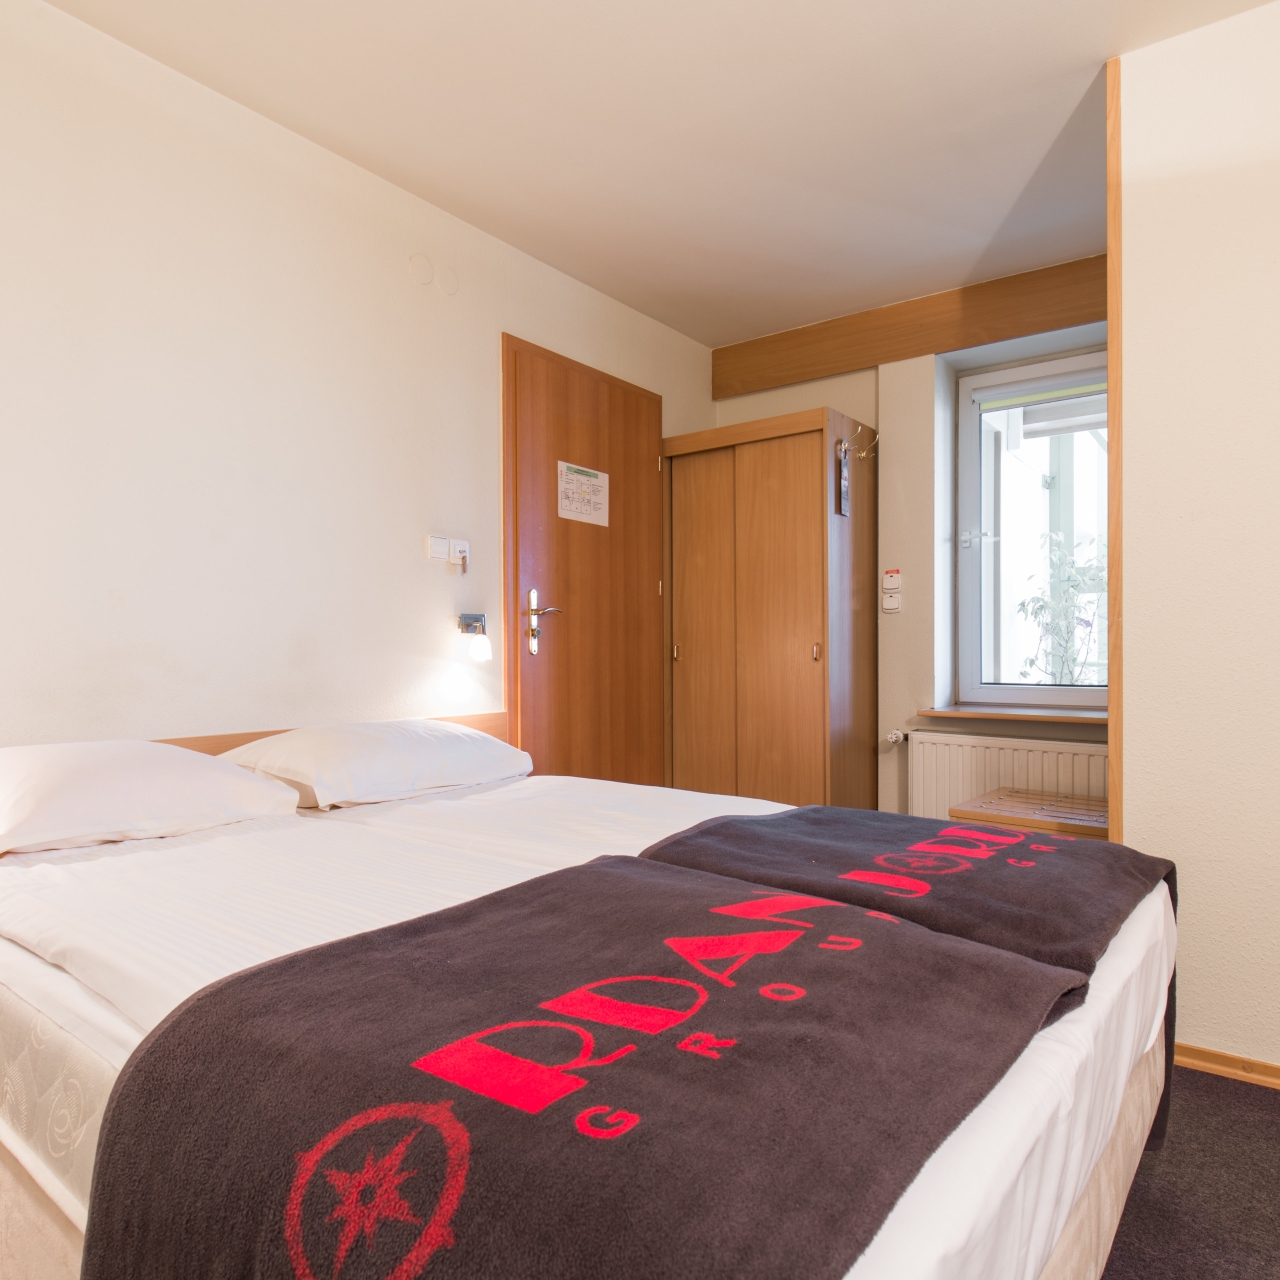 Hotel Jordan Guest Rooms Kraków- at HRS with free services